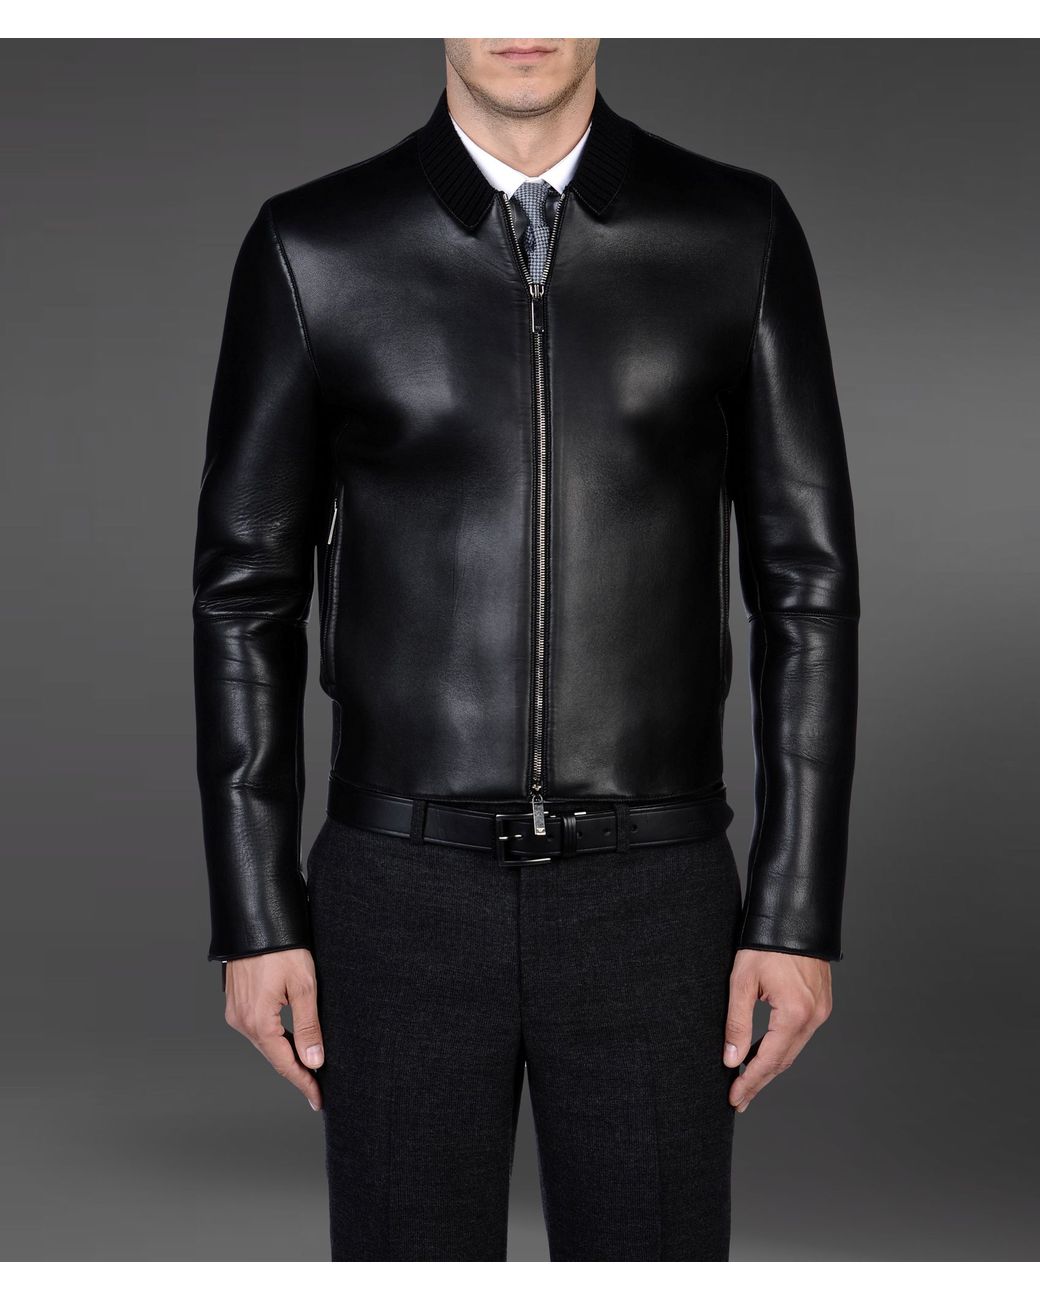 Total 34+ imagen armani mens leather jackets - Abzlocal.mx